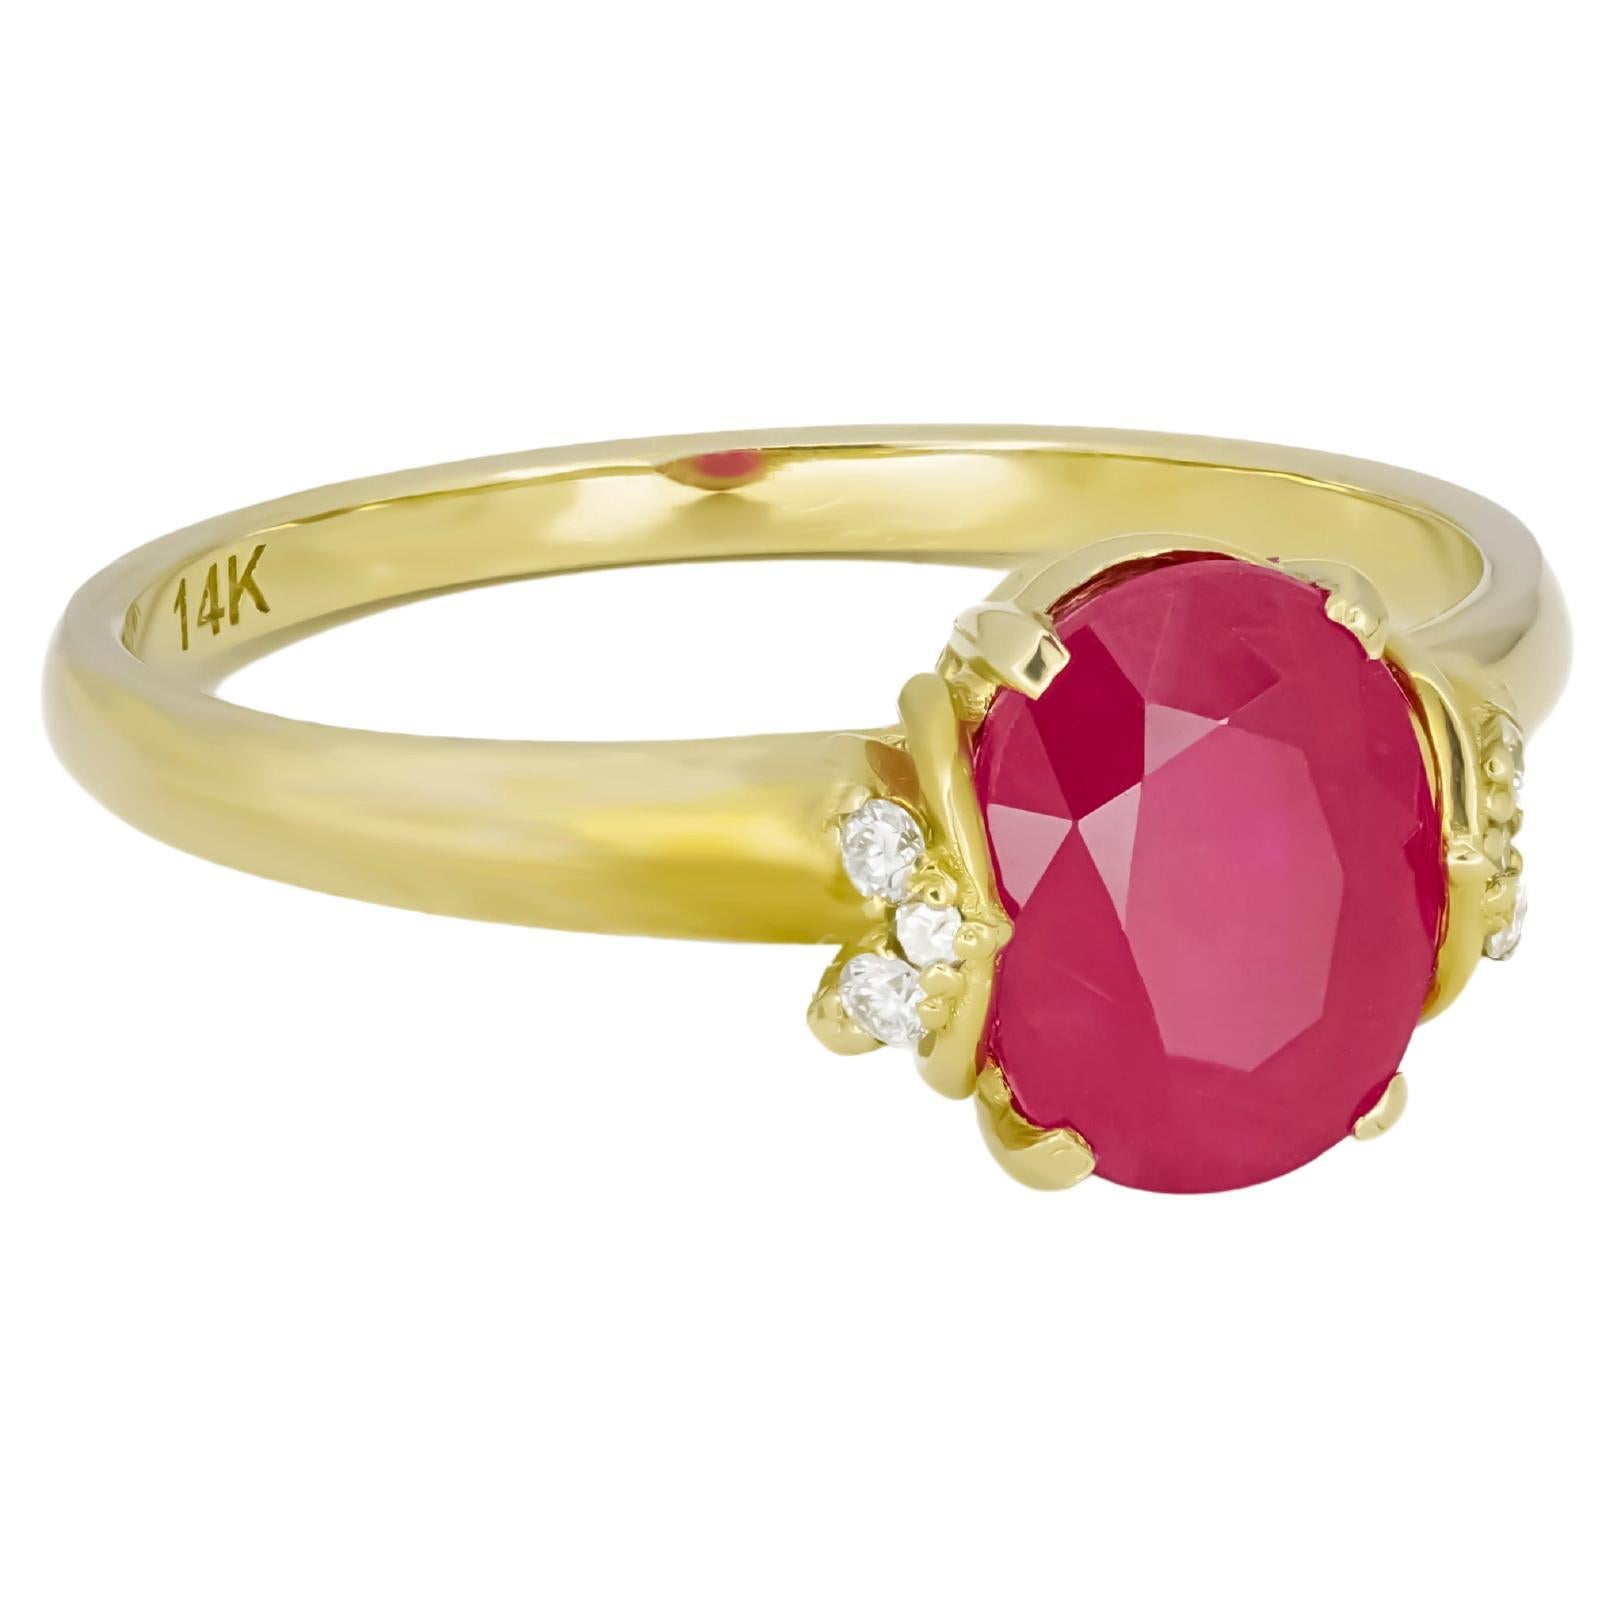 Modern 14 Karat Gold Ring with Ruby and Diamonds, Oval Ruby Ring